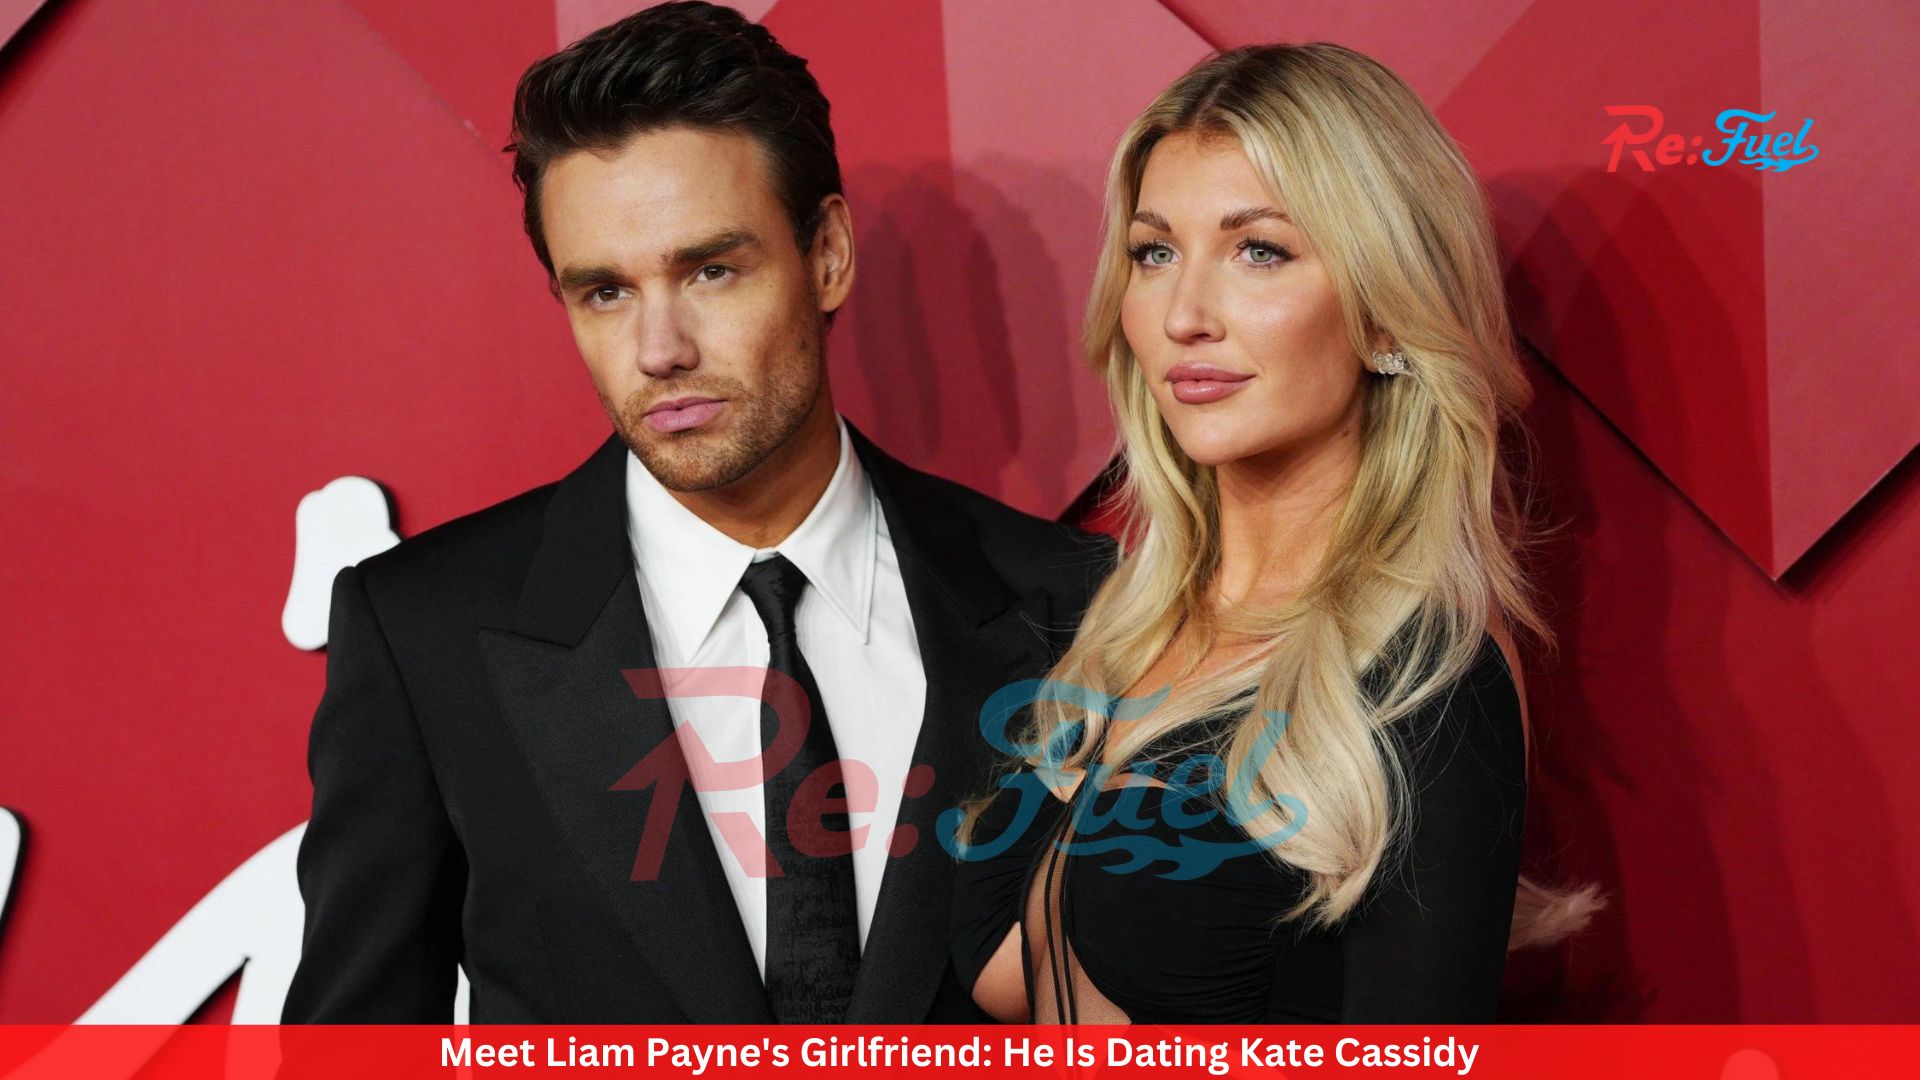 Meet Liam Payne's Girlfriend: He Is Dating Kate Cassidy